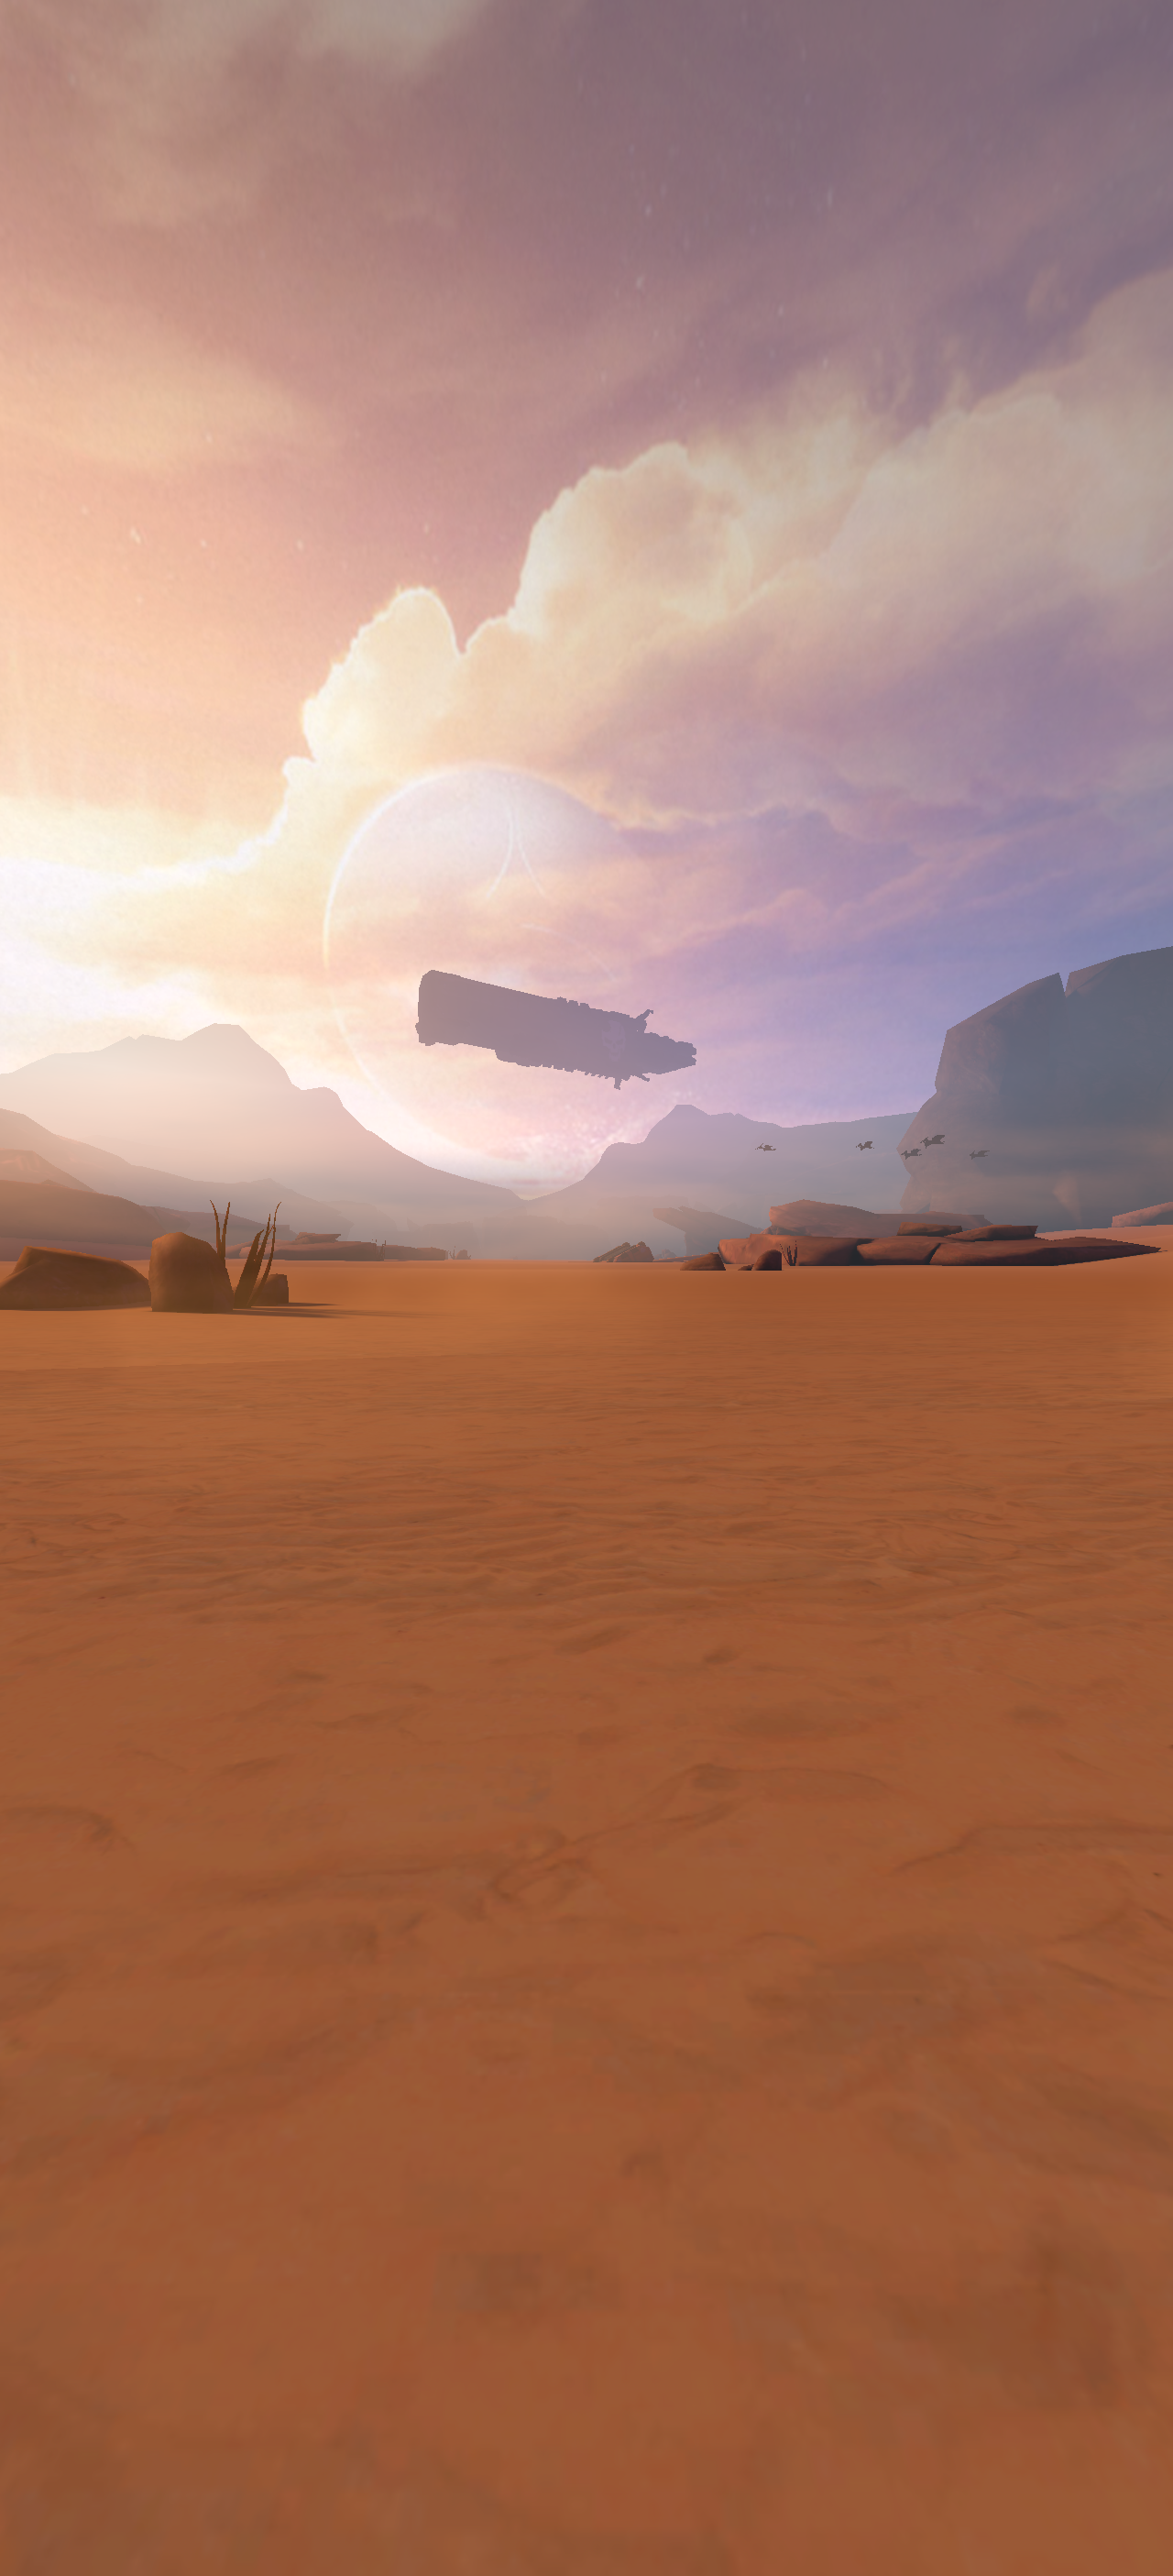 DetailPage-VRexperience-MissionPlanetX-InfoSection-background-desert_1280x2810_mobile